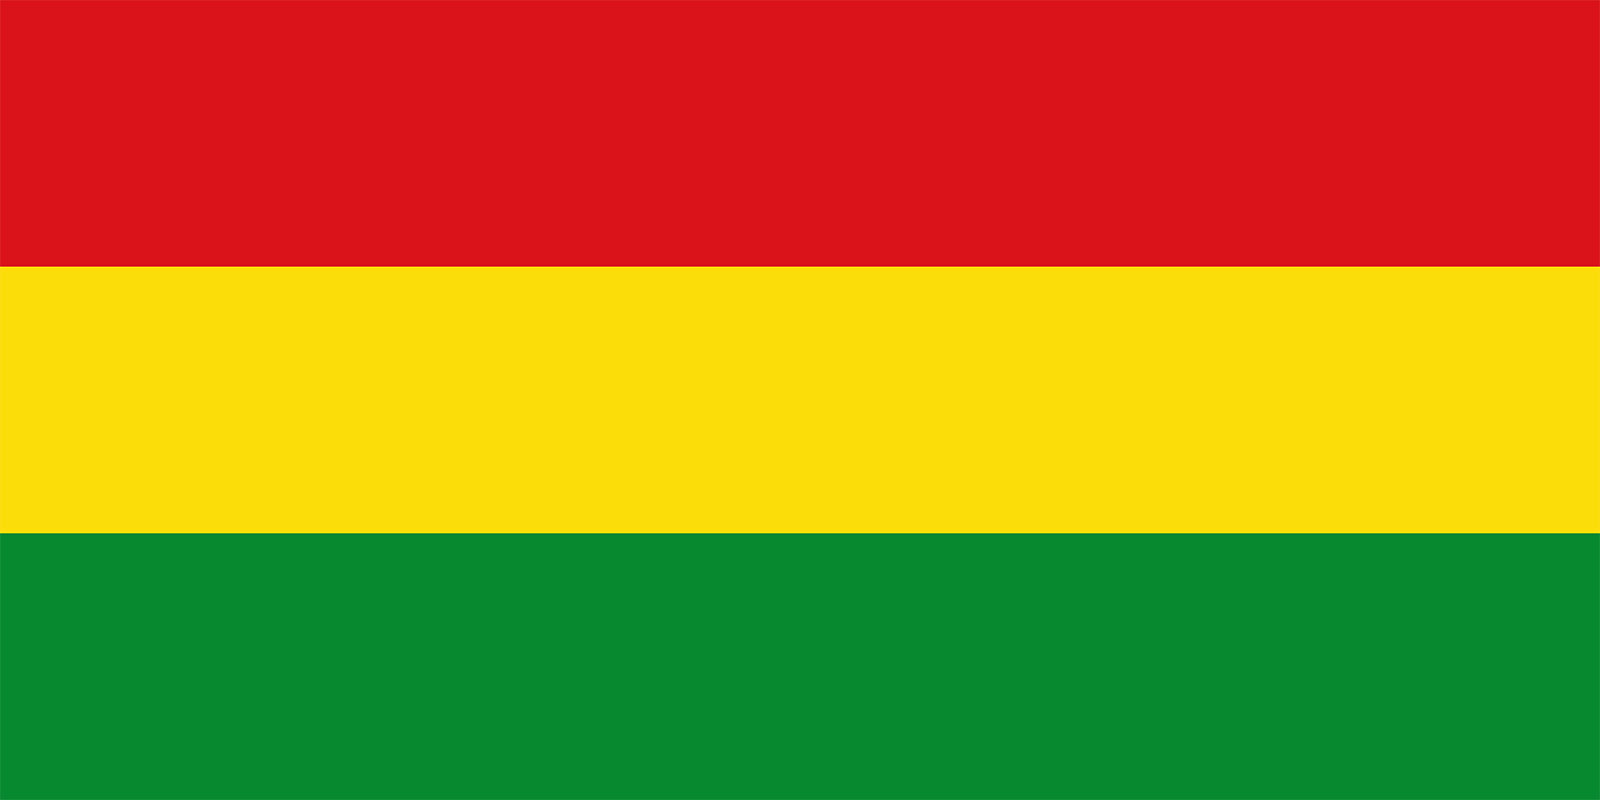 We represent Black History Month with the colors of the old Ethiopian flag